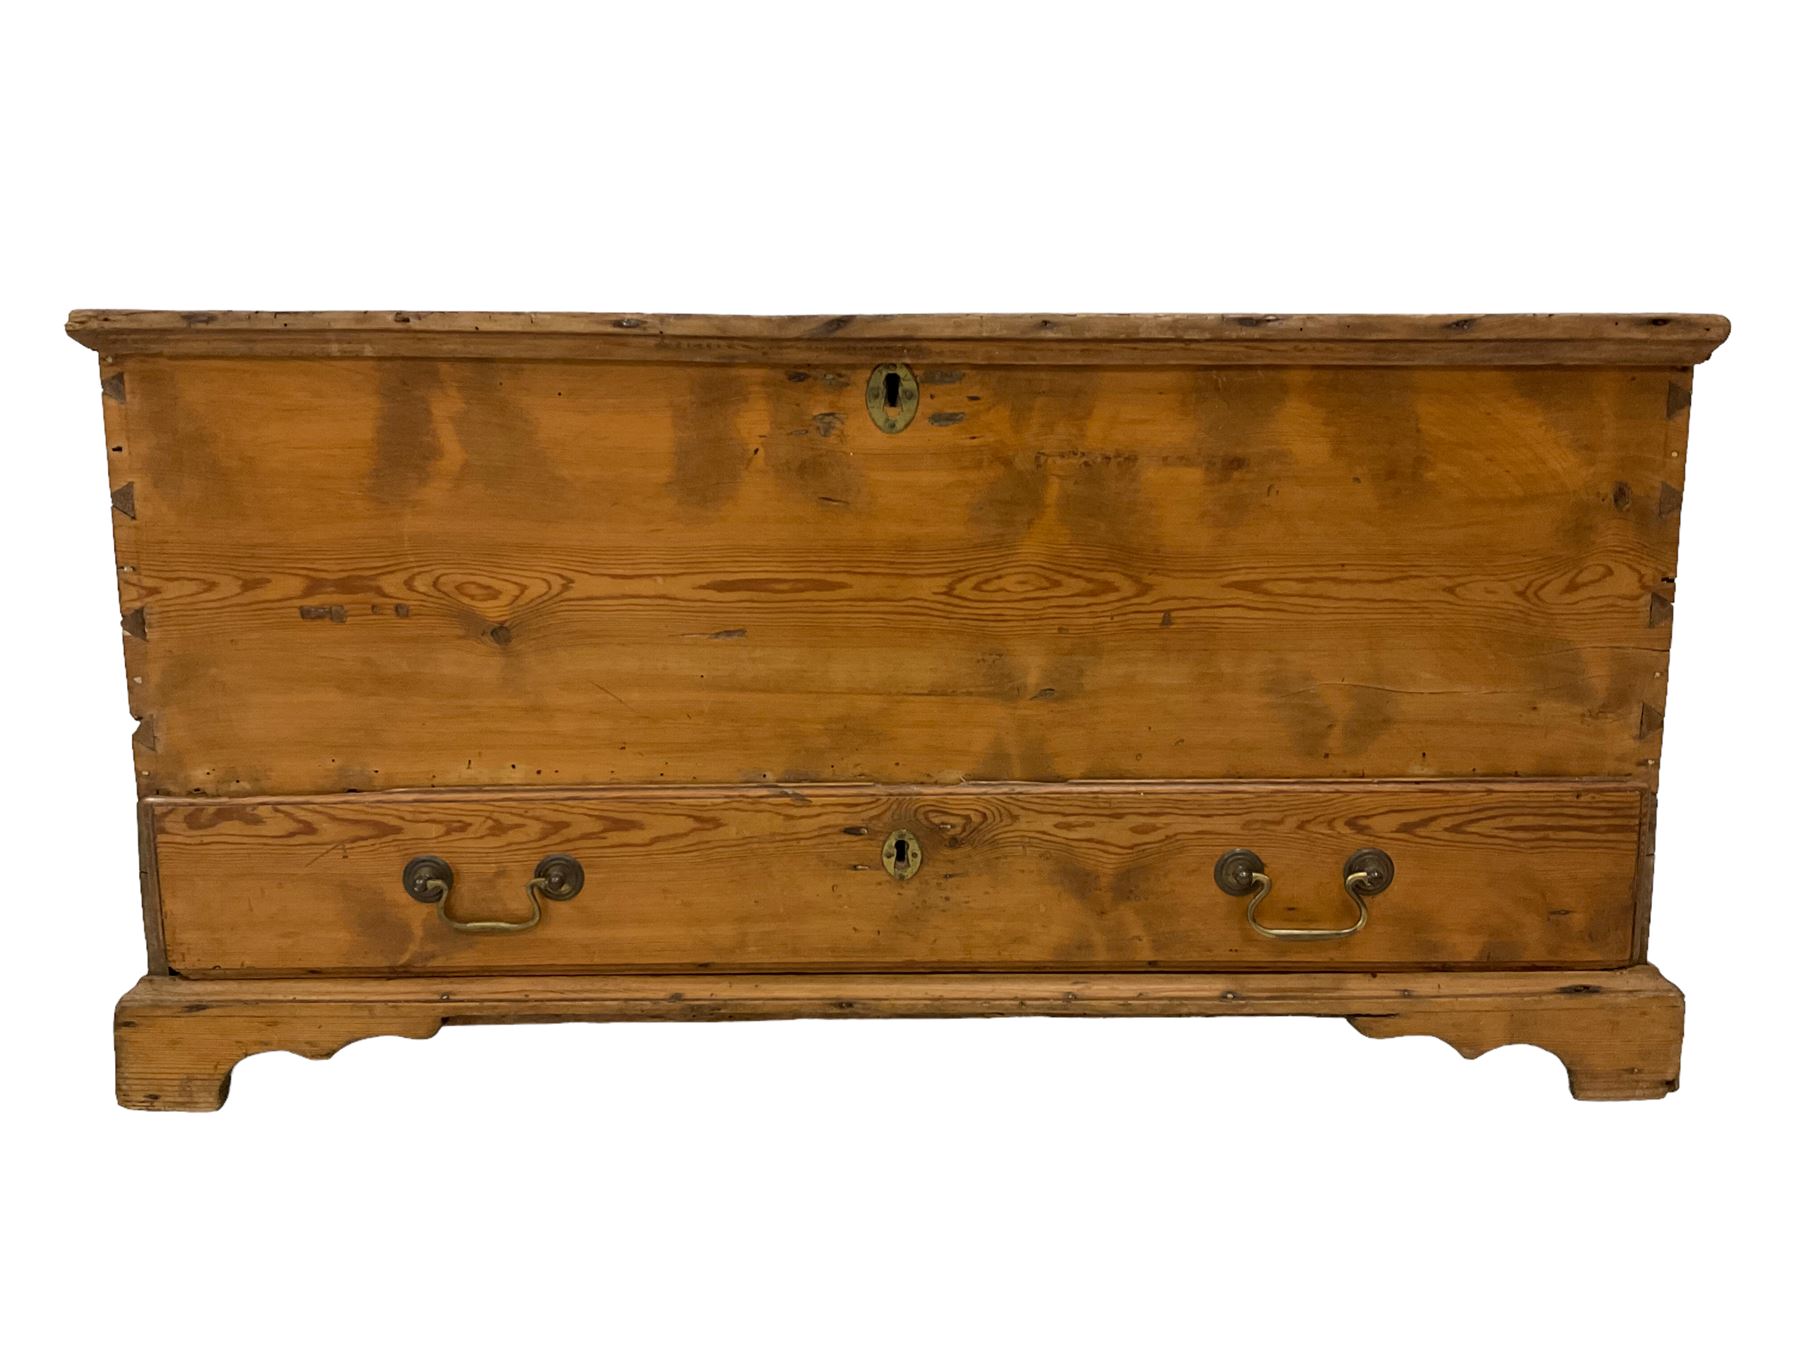 Late 19th century rustic pine mule chest - Image 4 of 5